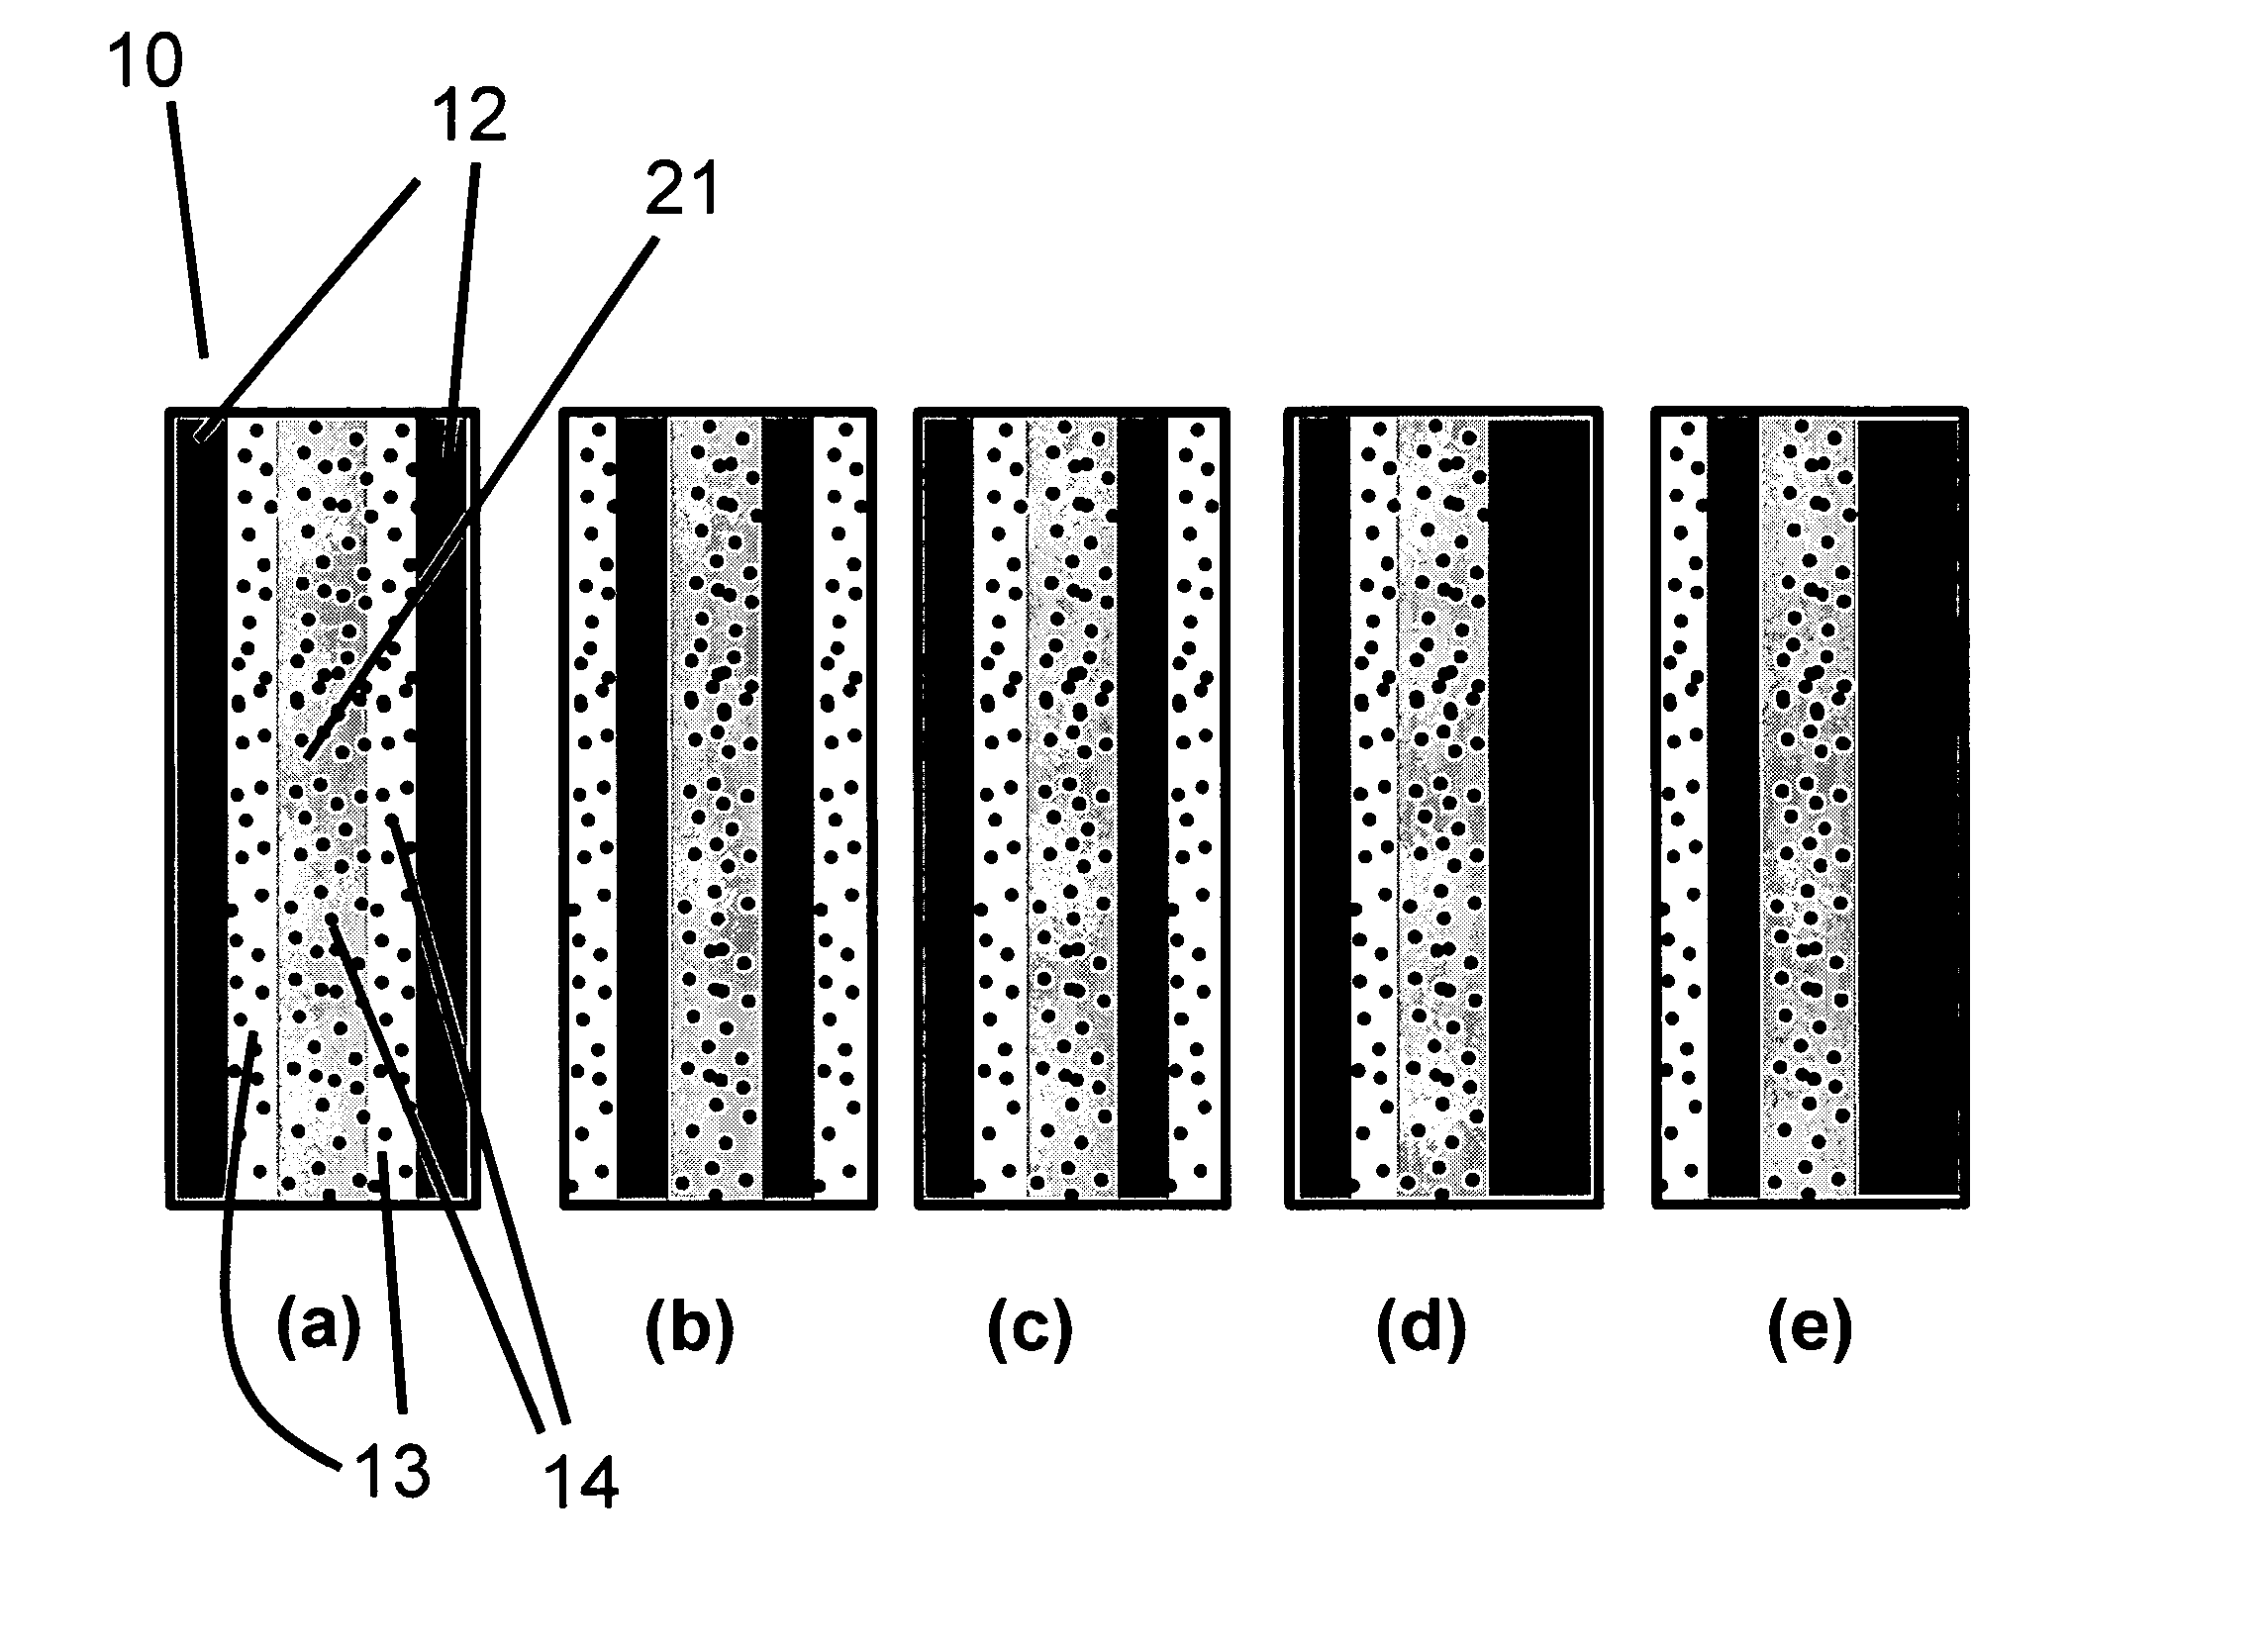 Solid polymer electrolyte and process for making same